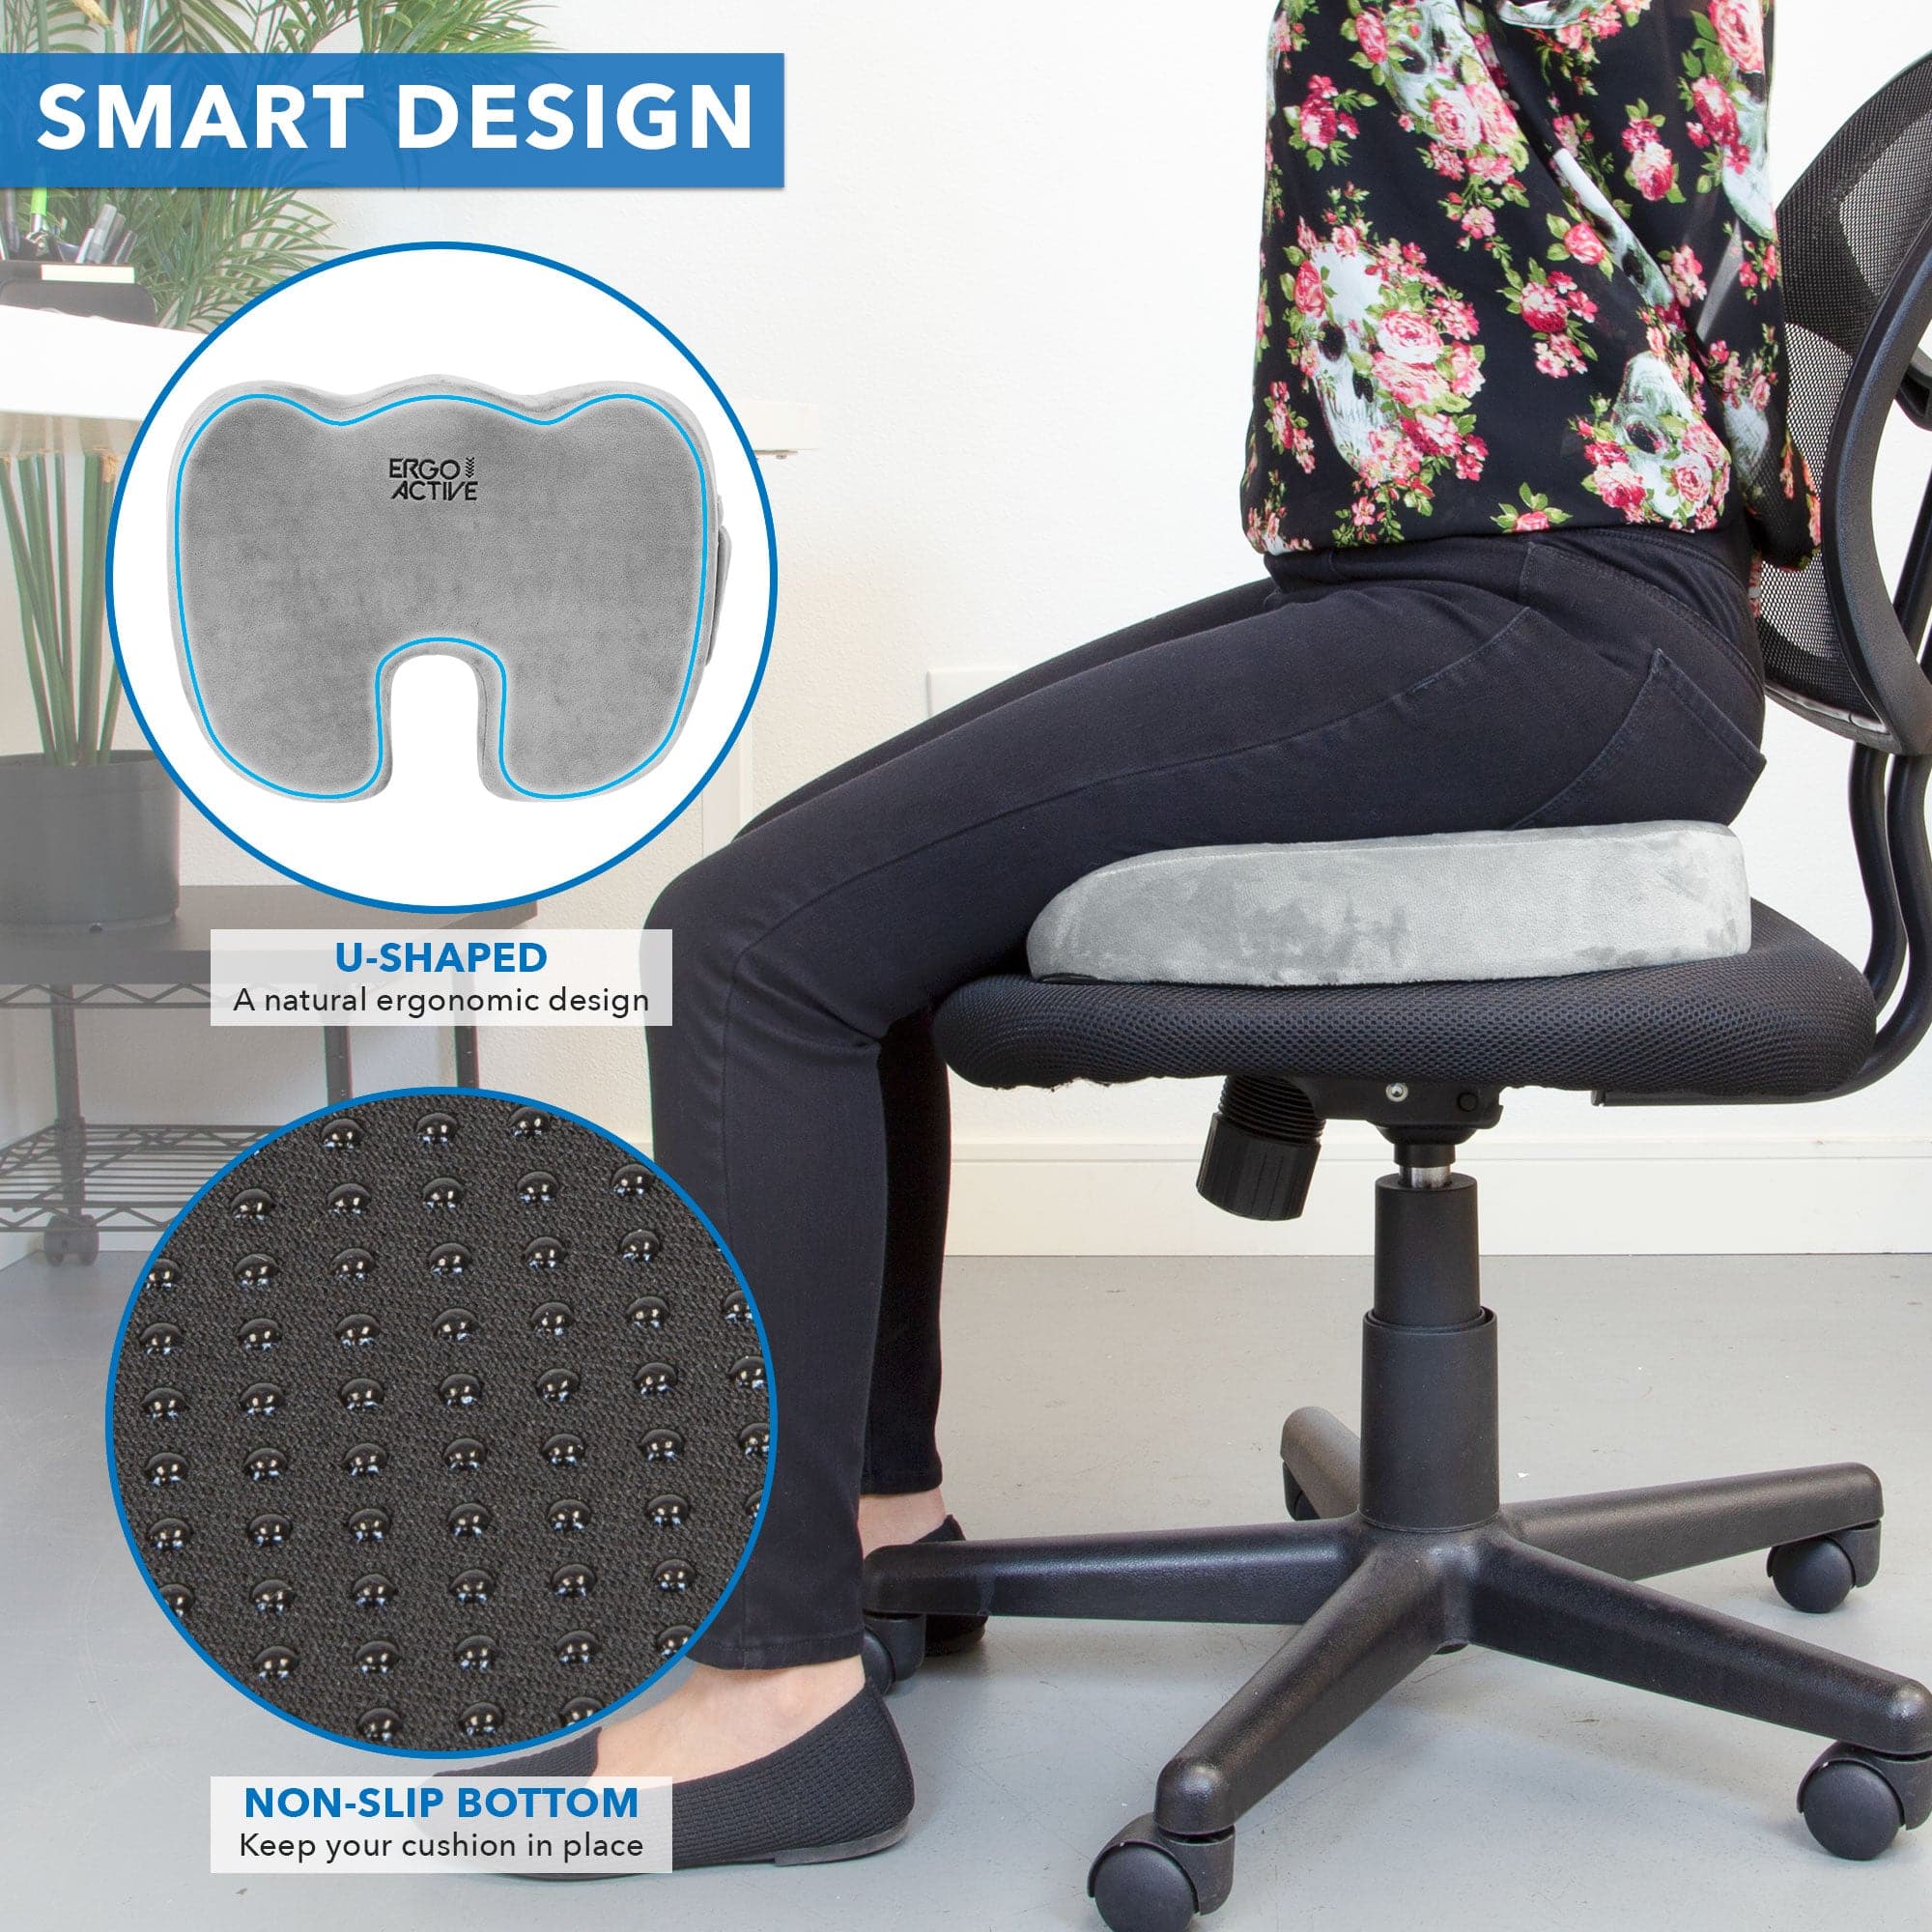 Divine Comfort Gel Enhanced Memory Foam Seat Cushion - Climate Control Gel Coccyx Cushion for Tailbone Pain Relief - Orthopedic Support Office Chair